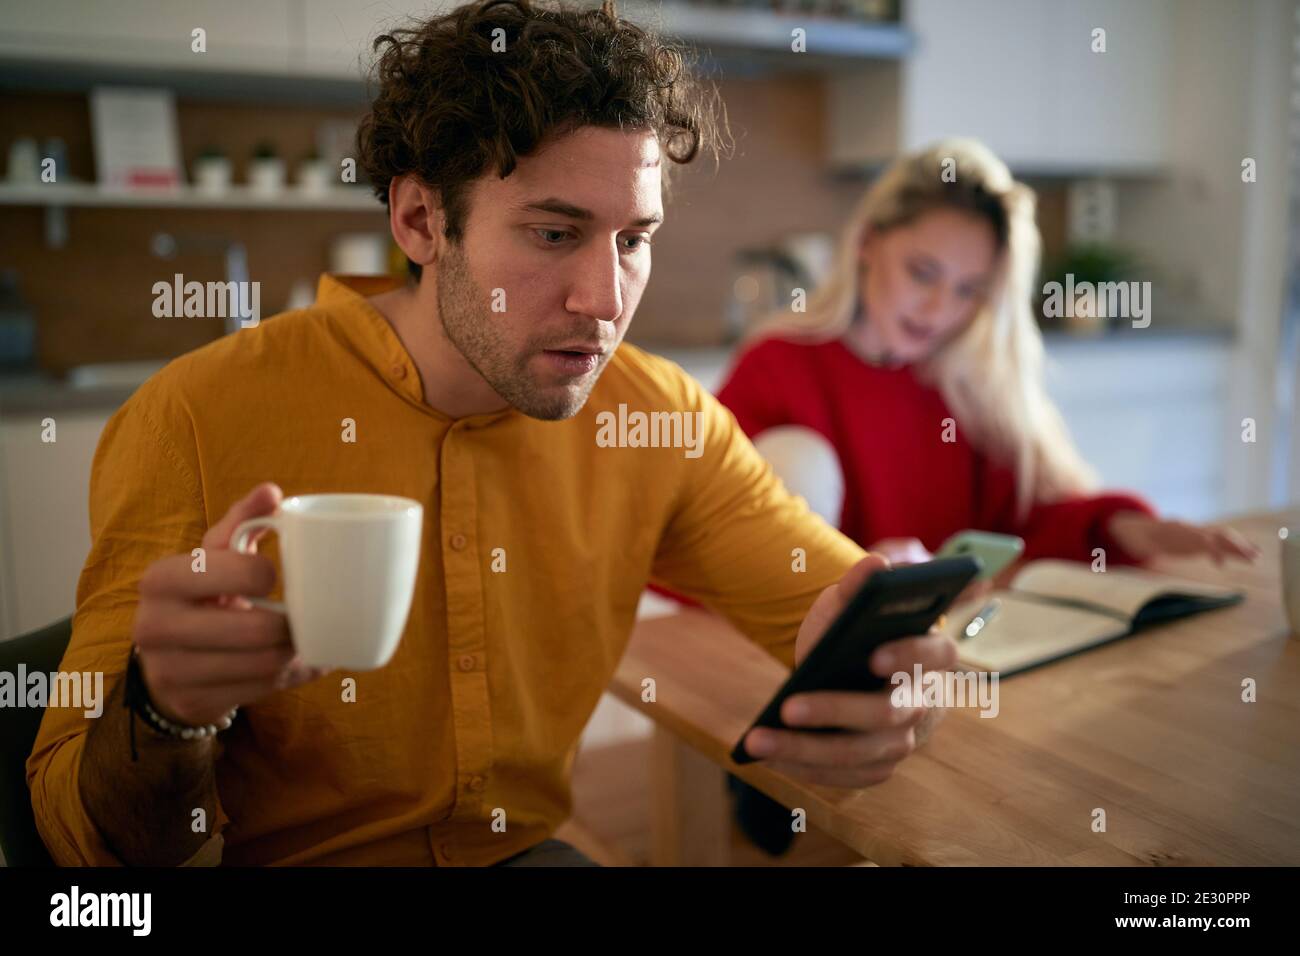 A young couple enjoying a coffee and surfing the internet on a beautiful morning at the kitchen. Routine, relationship, together Stock Photo